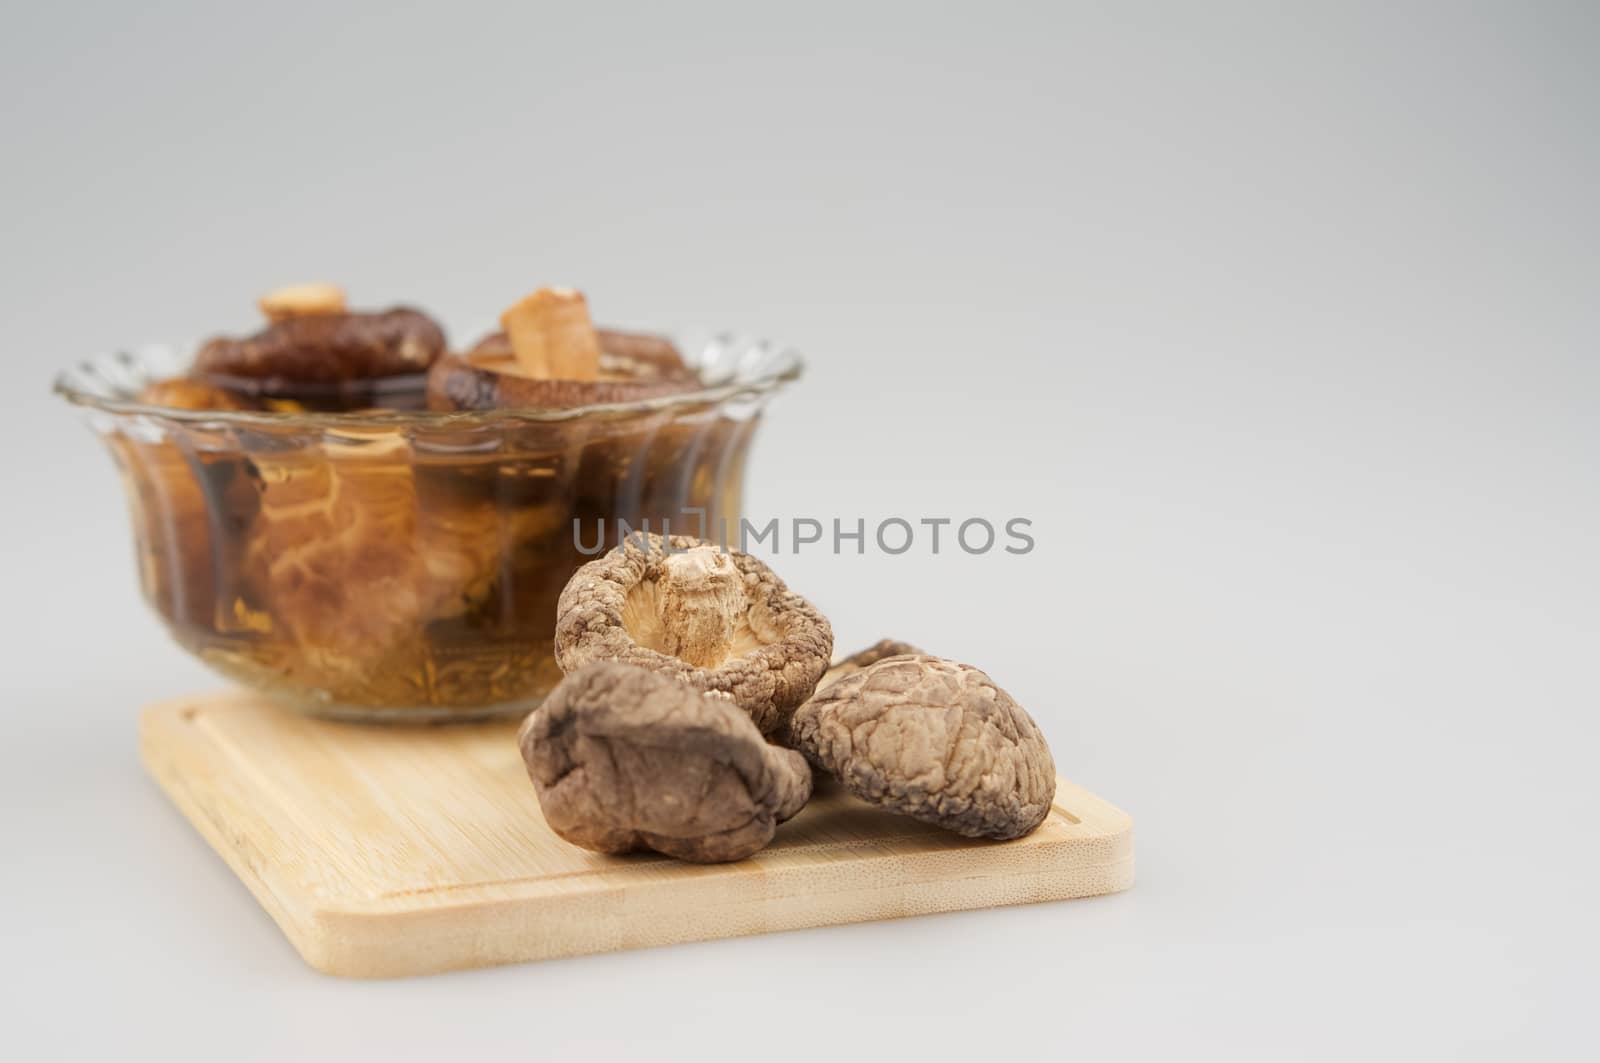 Dry Shitake mushroom or lentnus edodes place on chopping board have blur mushroom soak in glass cup as background photography with white background and copy space.